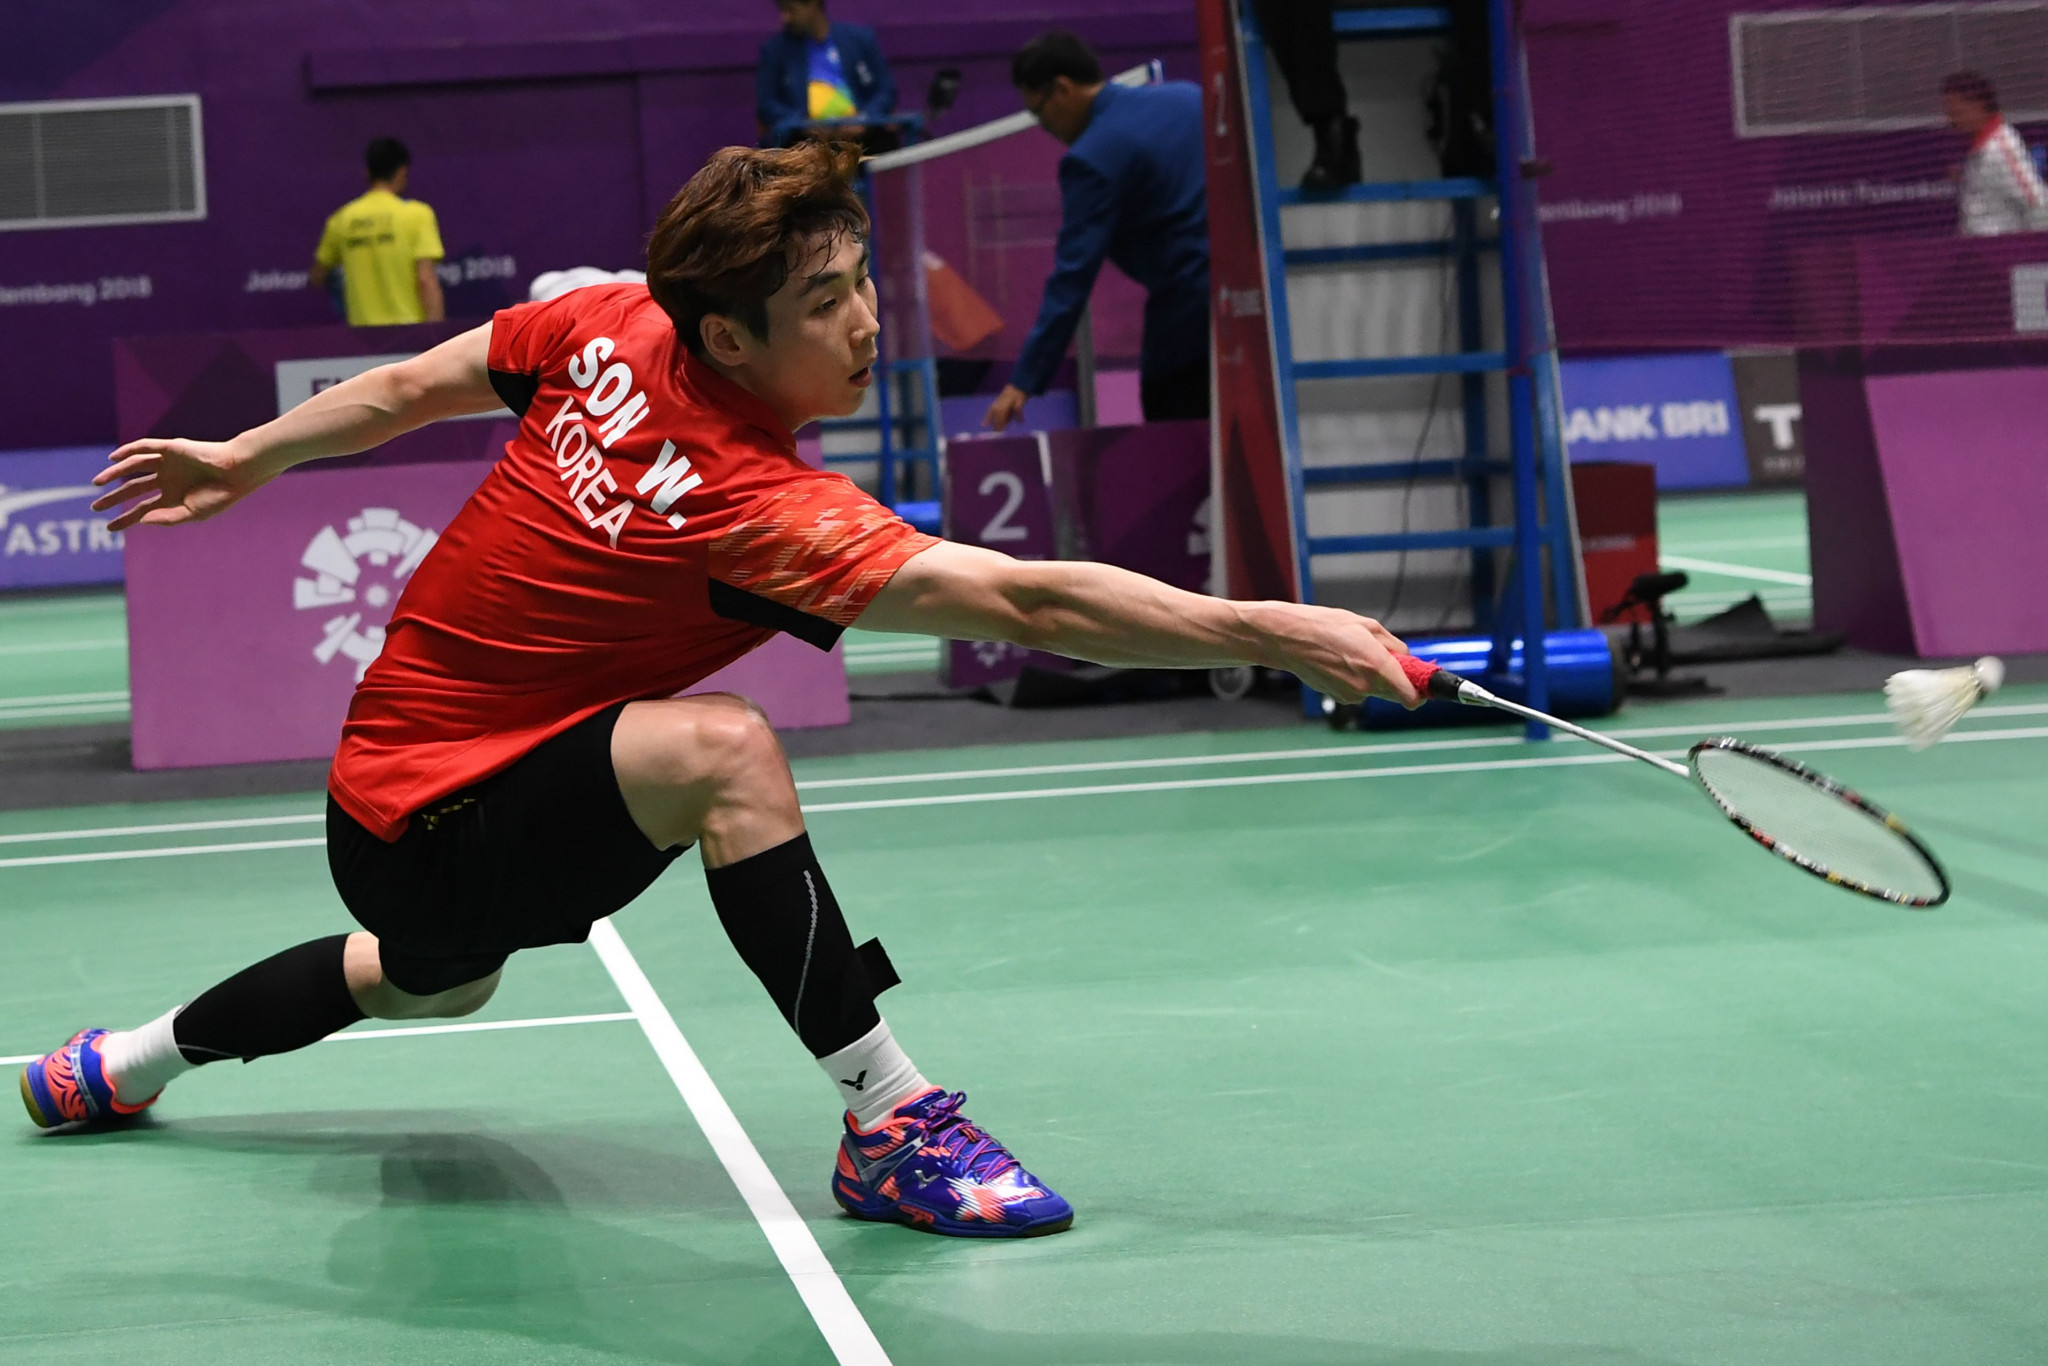 South Korea failed to win a badminton medal at the 2018 Asian Games ©Getty Images